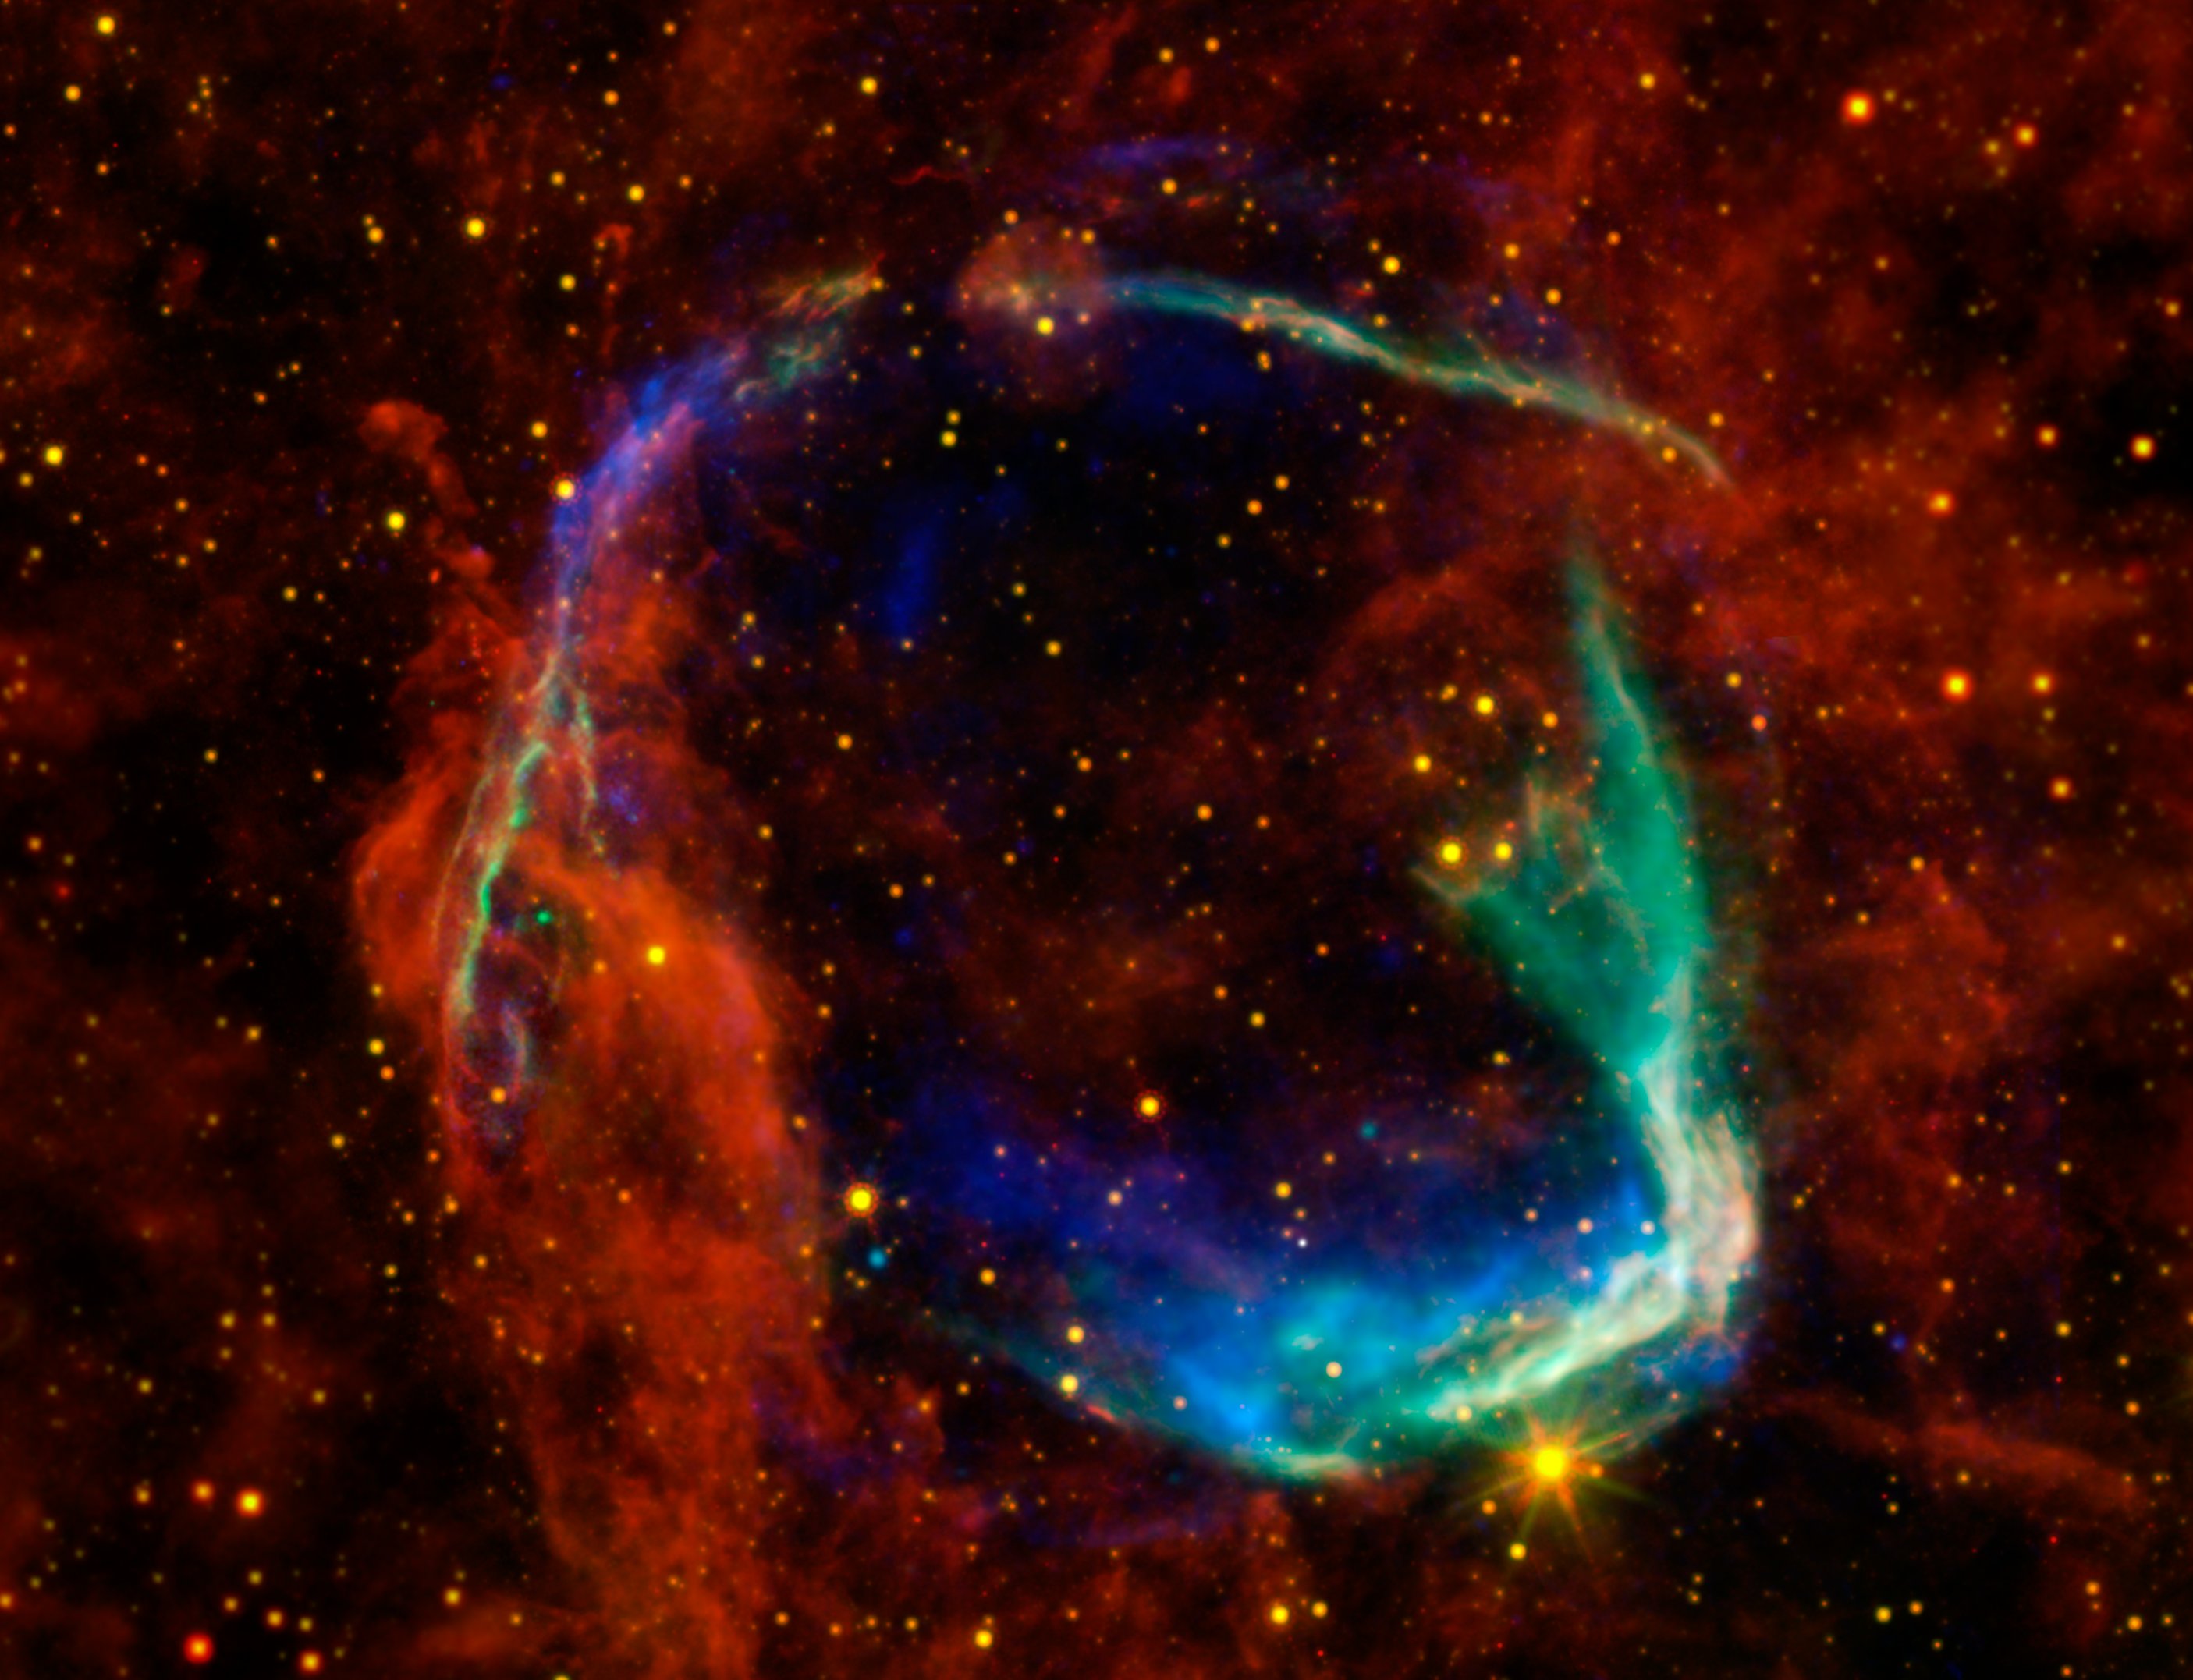 This starry background has red clouds scattered across the image. There’s a wide arc of blue, white and green at the bottom right of the image, and a thin arc running over the left and top of the image. Together these arcs almost form a circle.